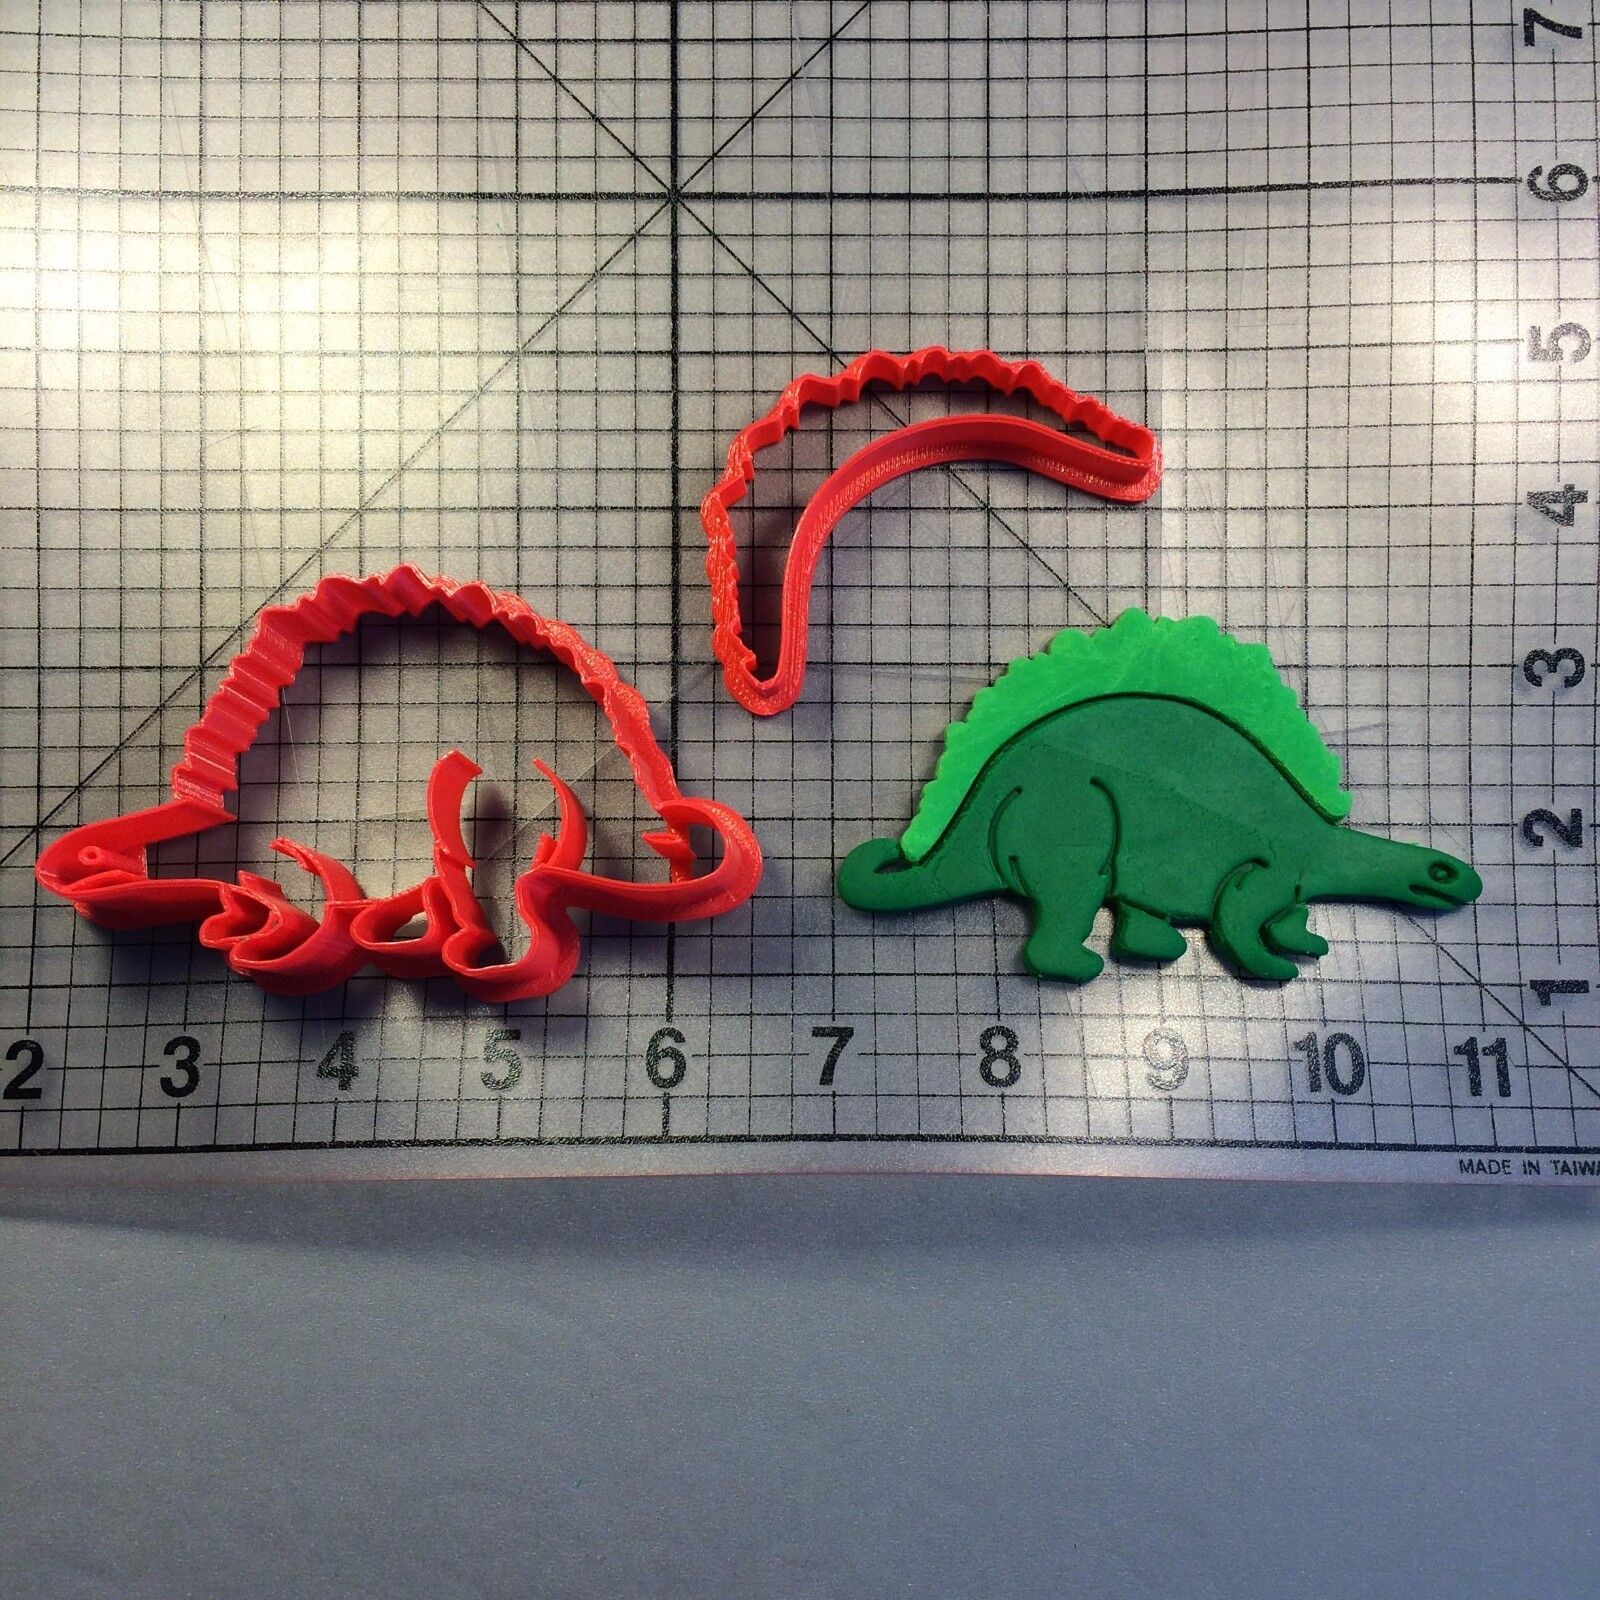 Stegosaurus 100 Max 45% OFF Cookie Cutter Set Limited price